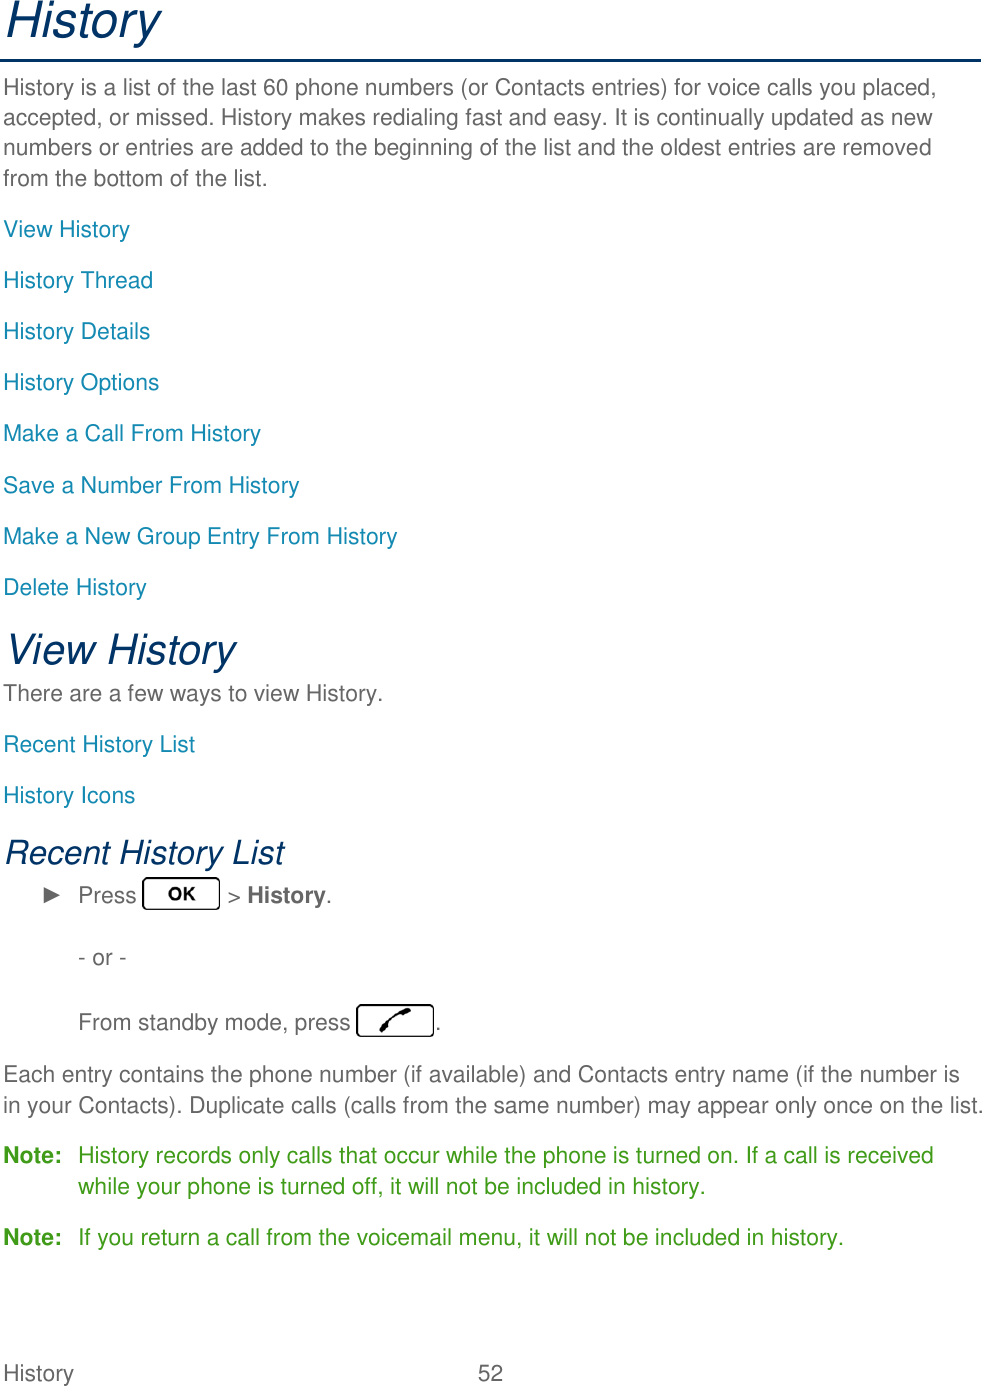 History  52   History History is a list of the last 60 phone numbers (or Contacts entries) for voice calls you placed, accepted, or missed. History makes redialing fast and easy. It is continually updated as new numbers or entries are added to the beginning of the list and the oldest entries are removed from the bottom of the list. View History History Thread History Details History Options Make a Call From History Save a Number From History Make a New Group Entry From History Delete History View History There are a few ways to view History. Recent History List History Icons Recent History List ►  Press   &gt; History.  - or -  From standby mode, press  . Each entry contains the phone number (if available) and Contacts entry name (if the number is in your Contacts). Duplicate calls (calls from the same number) may appear only once on the list. Note:  History records only calls that occur while the phone is turned on. If a call is received while your phone is turned off, it will not be included in history. Note:  If you return a call from the voicemail menu, it will not be included in history. 